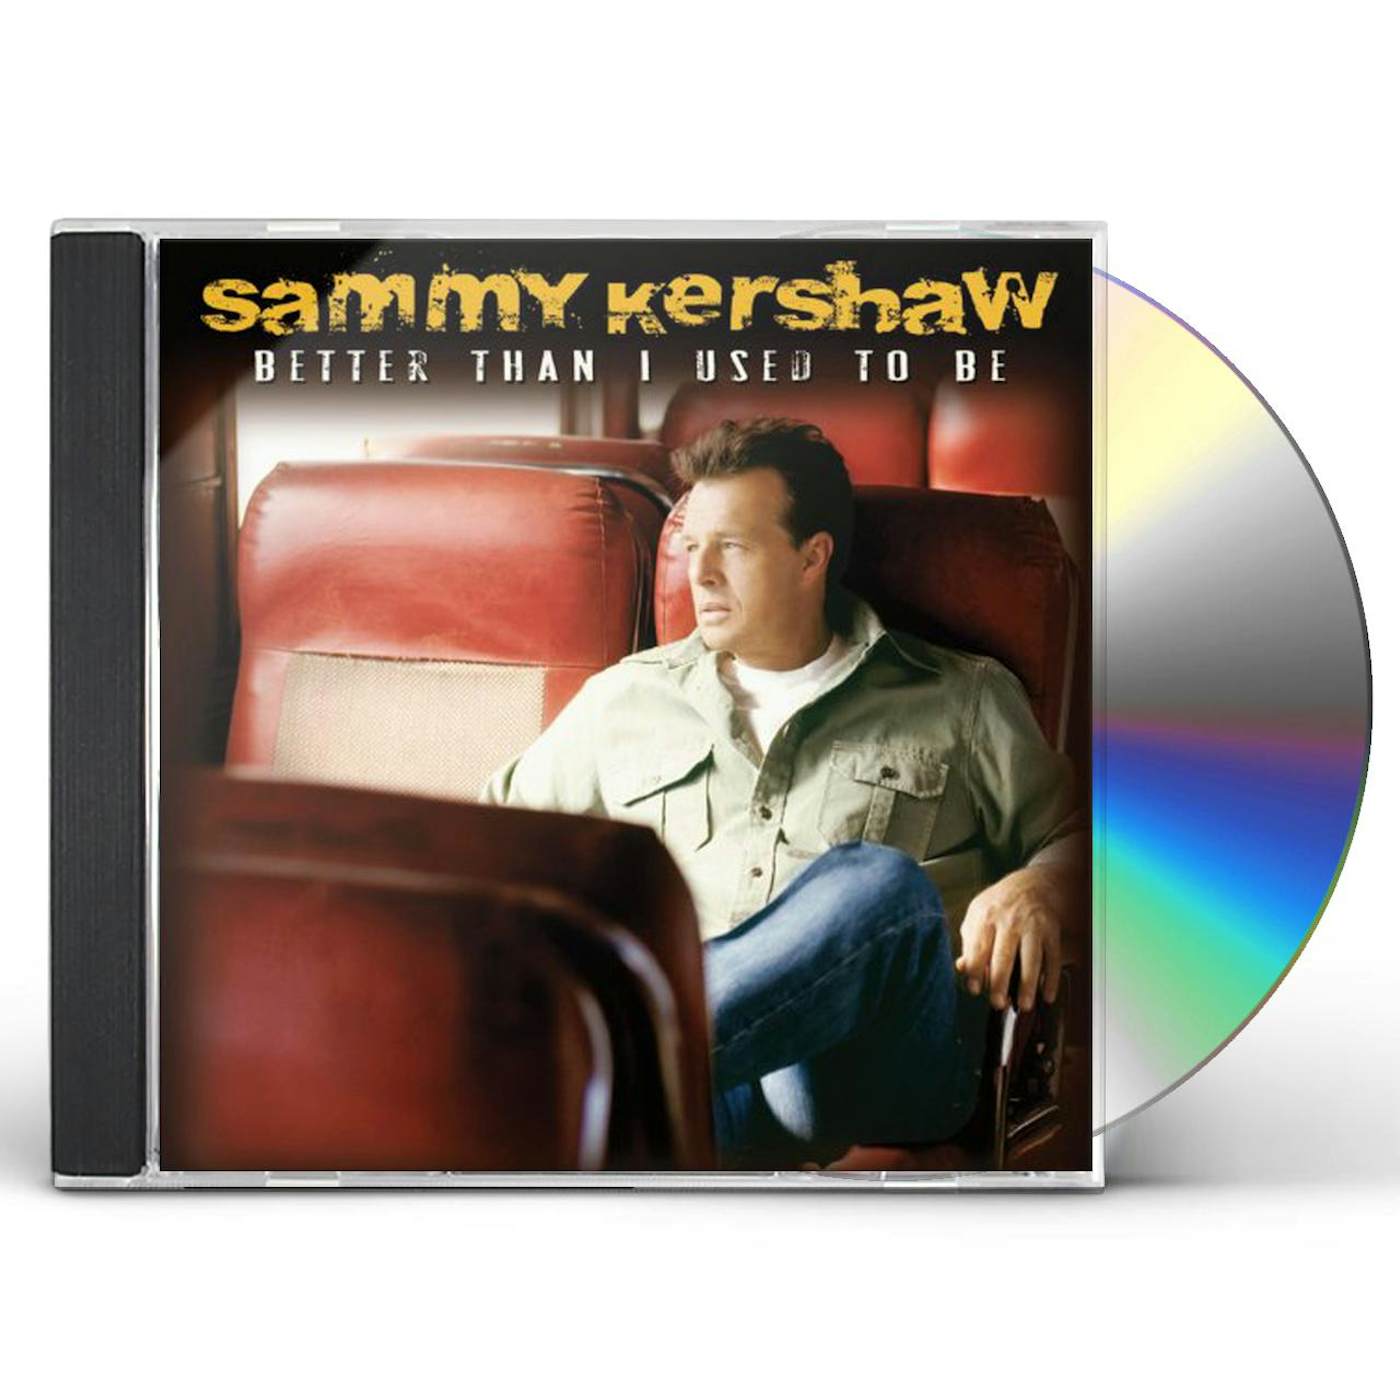 Sammy Kershaw BETTER THAN I USED TO BE CD